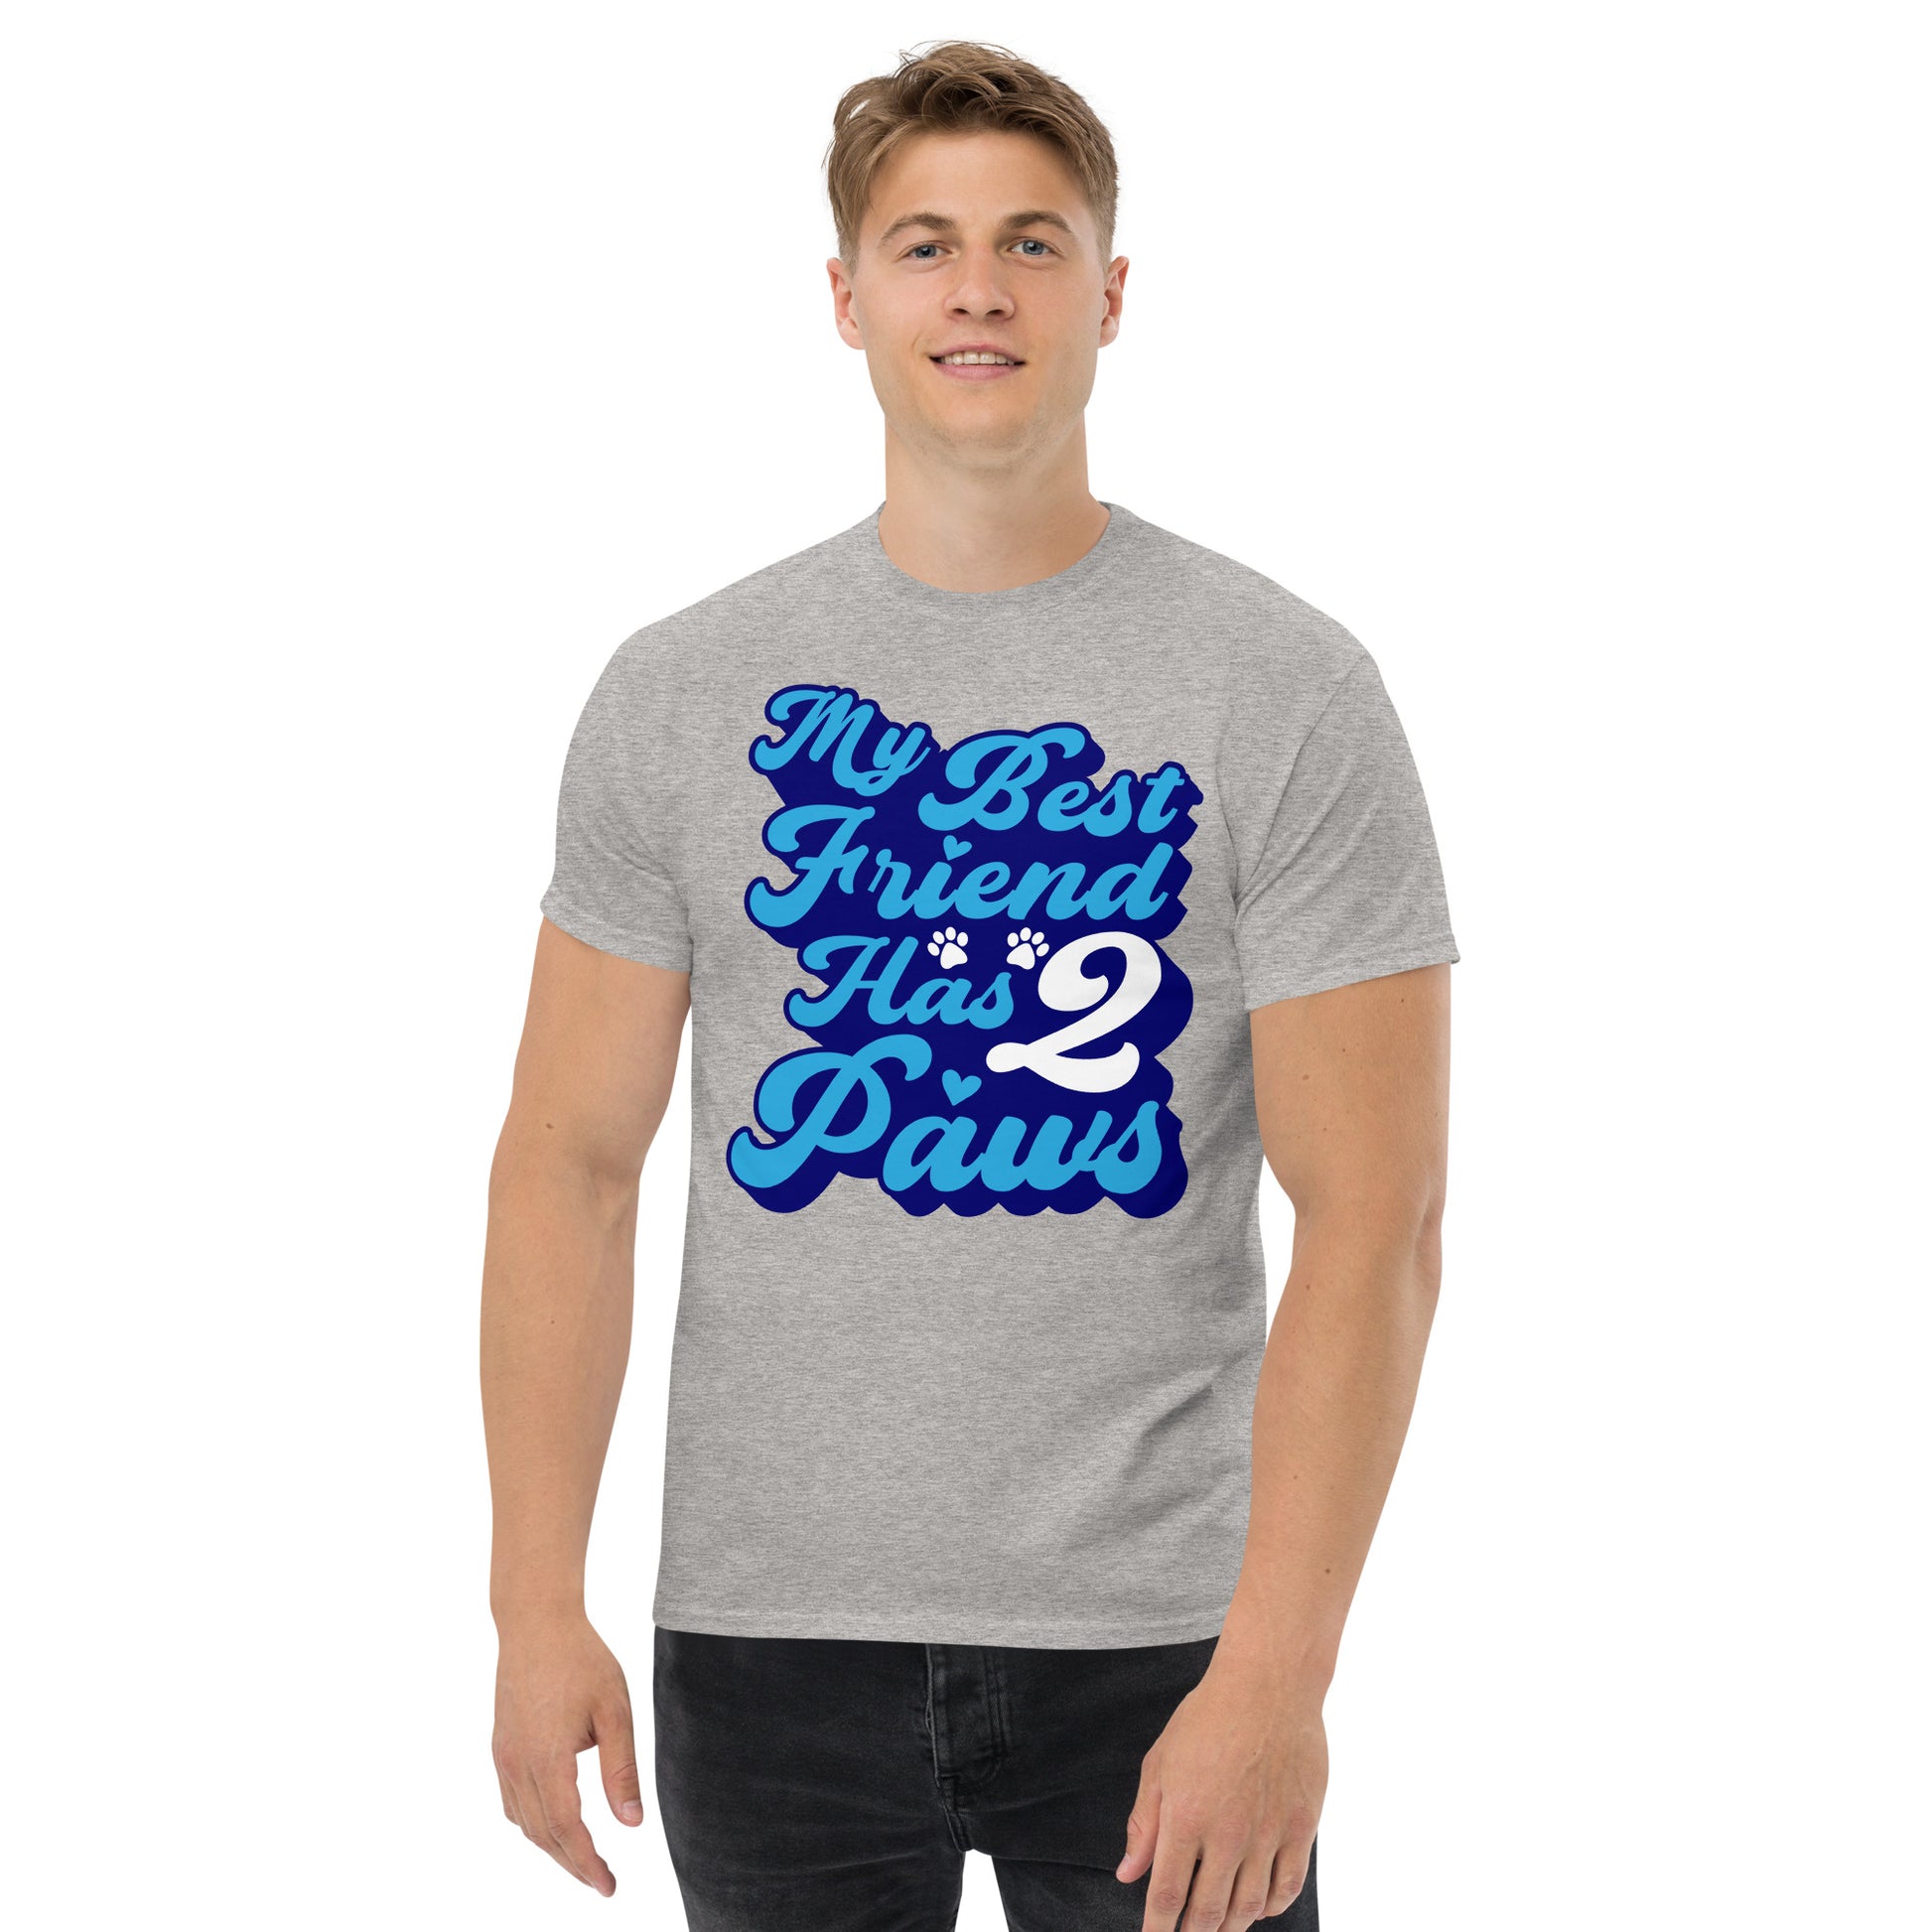 My best friend has 2 Paws men’s t-shirts by Dog Artistry sport grey